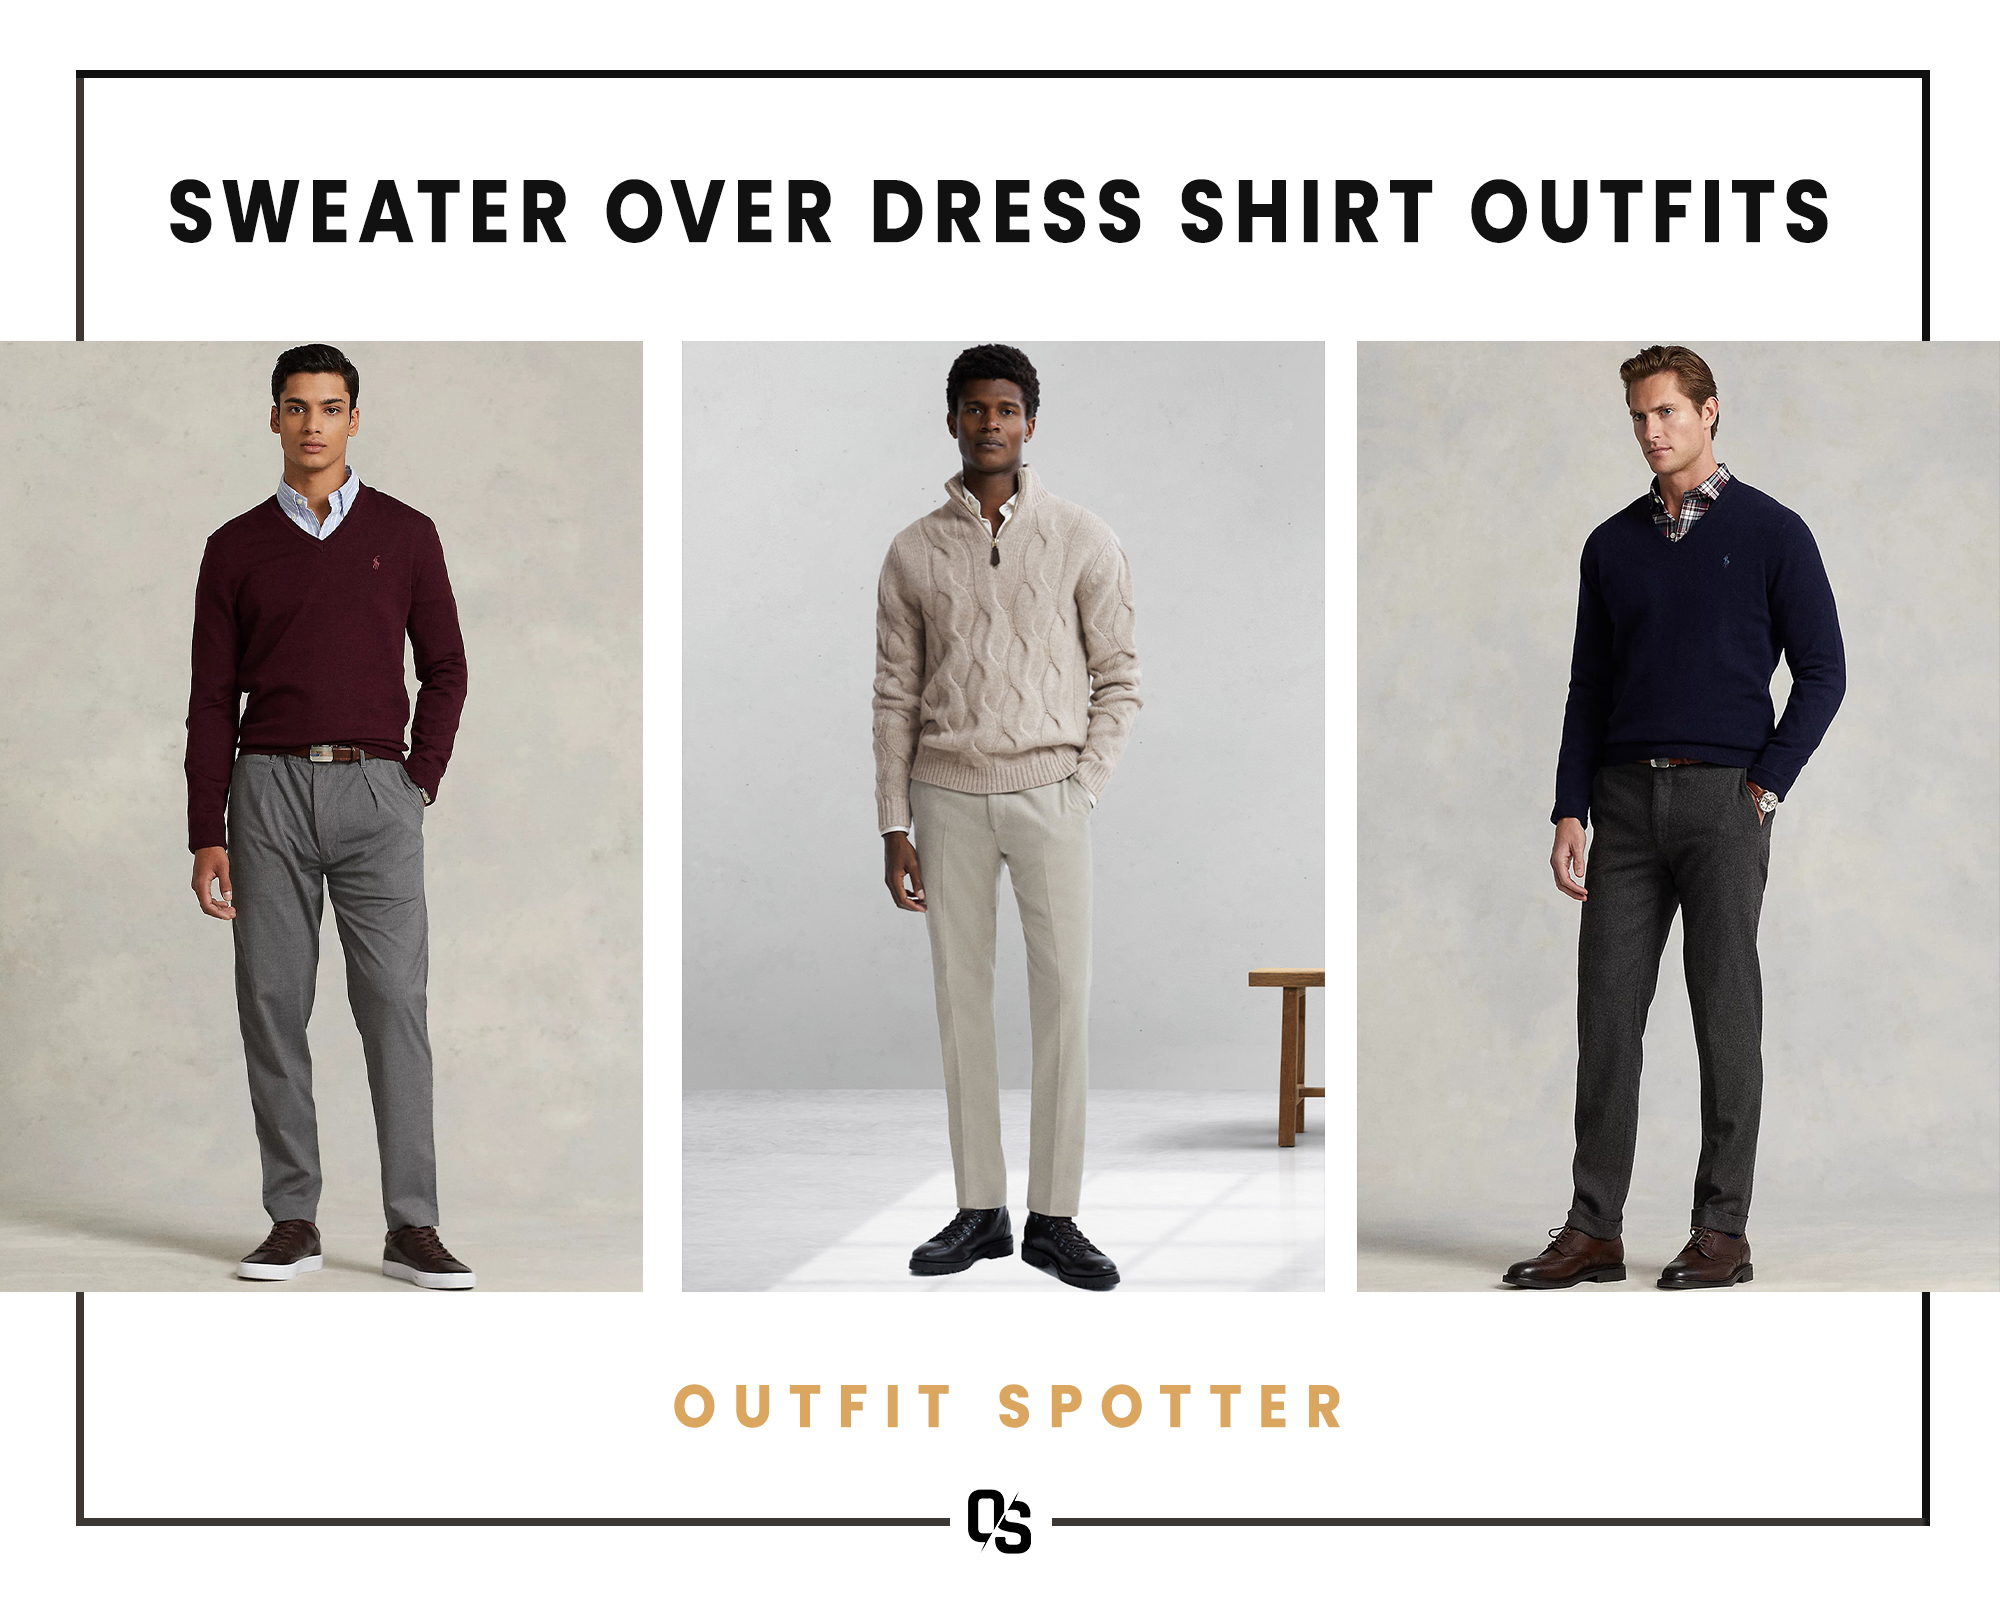 14 Stylish Sweater Over Dress Shirt Outfit Ideas – Outfit Spotter